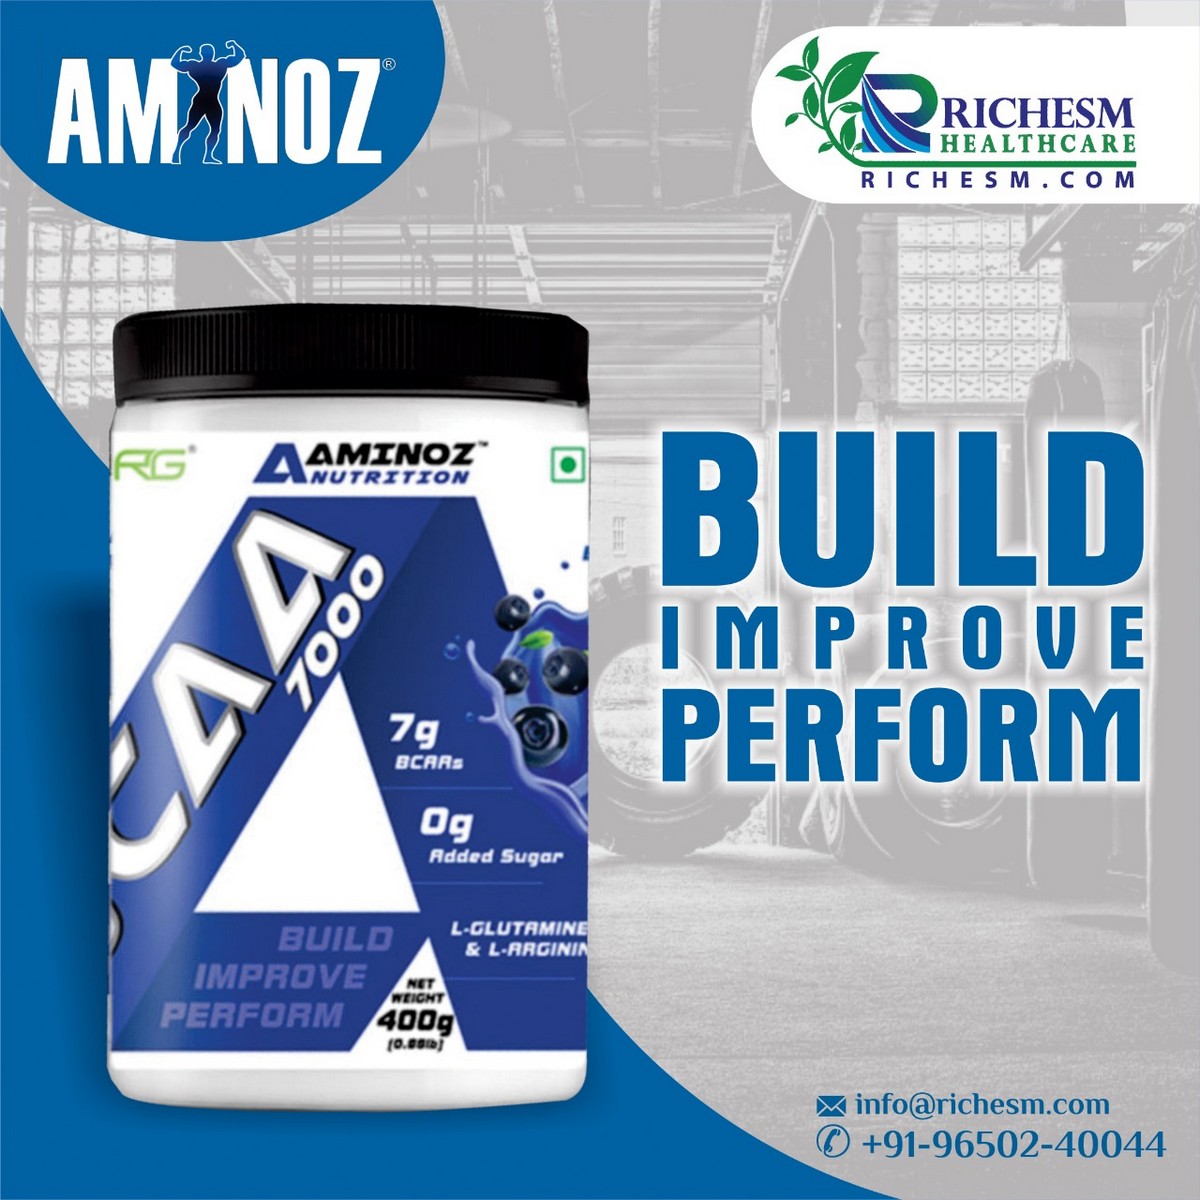 Improve Workout Endurance Performanceand Agility with Aminoz